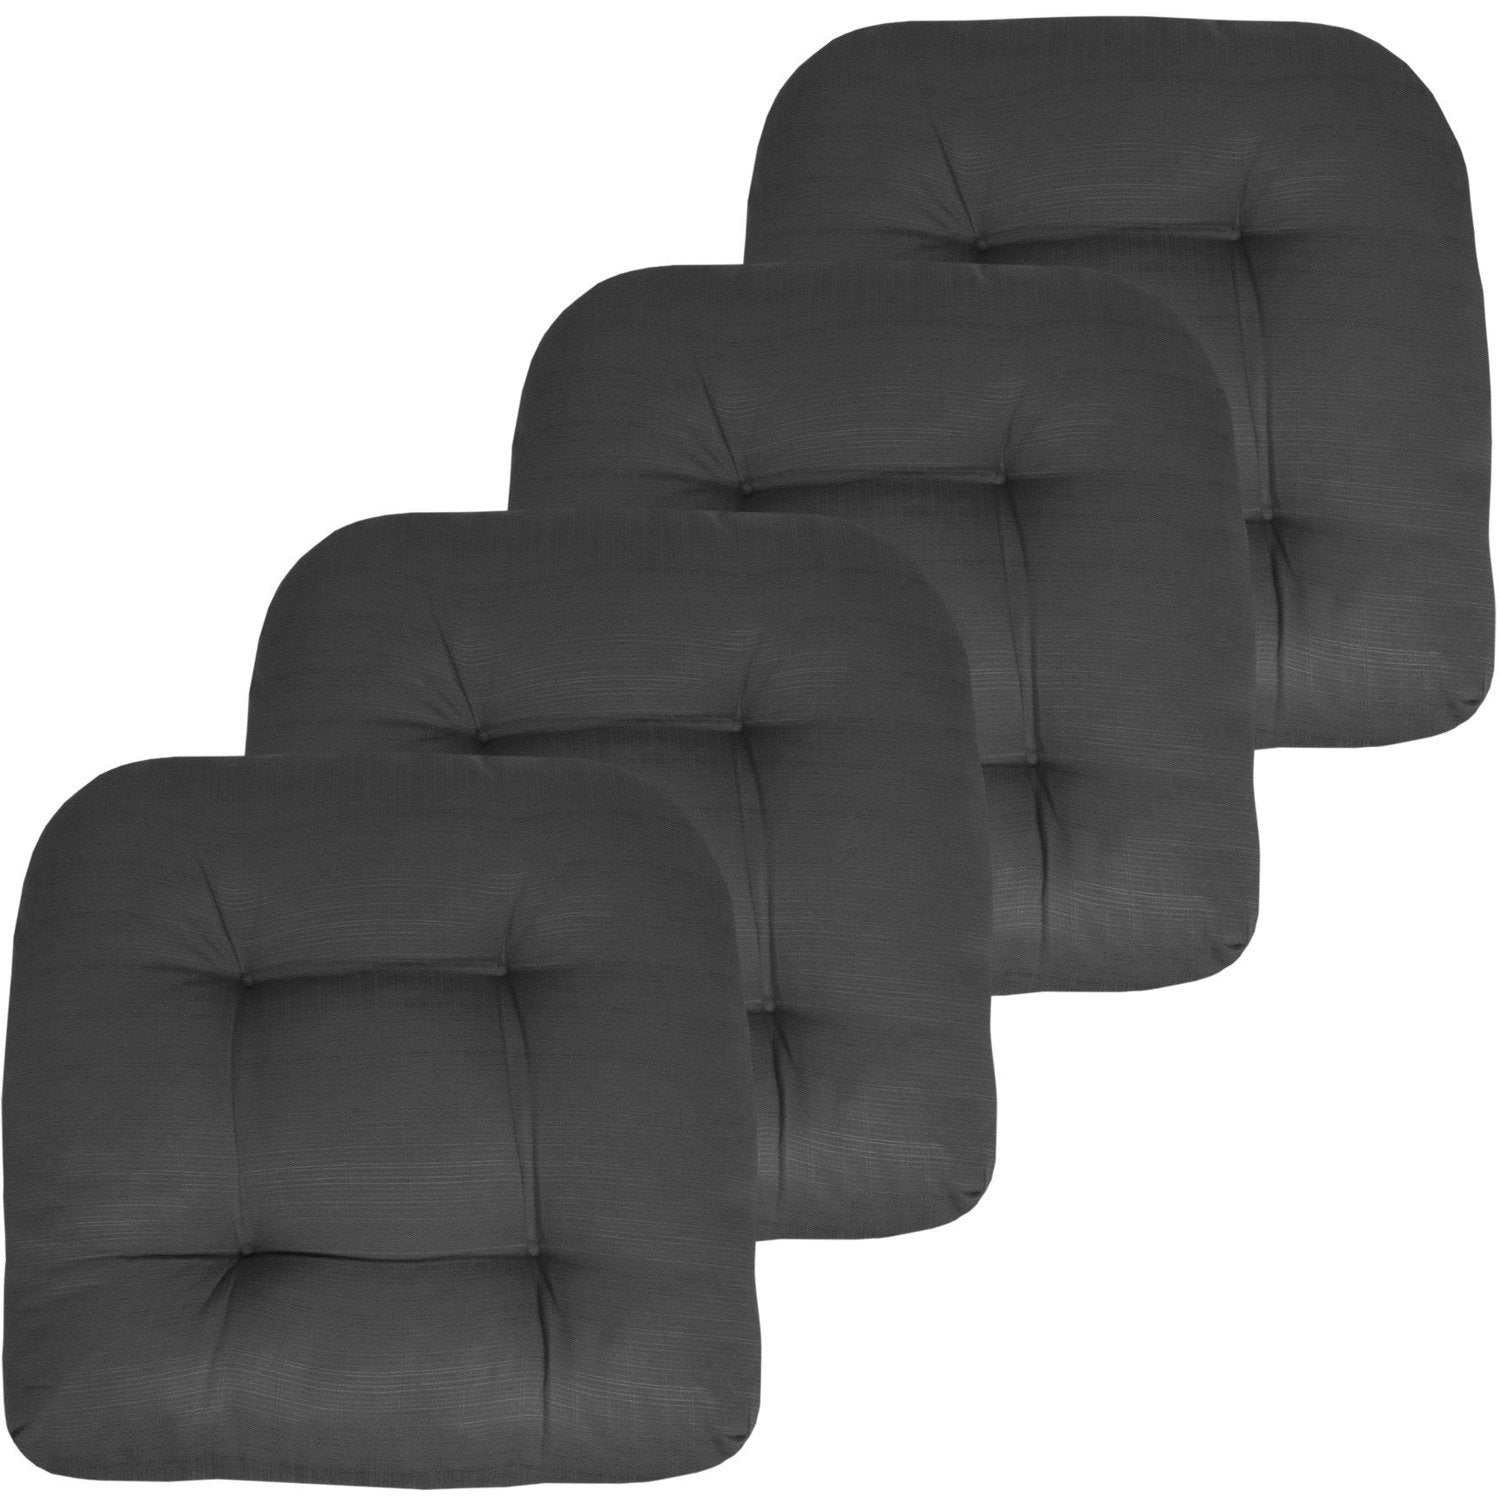 http://sweethomecollection.com/cdn/shop/products/patio-chair-cushion-set-19x19-charcoal-4-pack.jpg?v=1650552831&width=2000